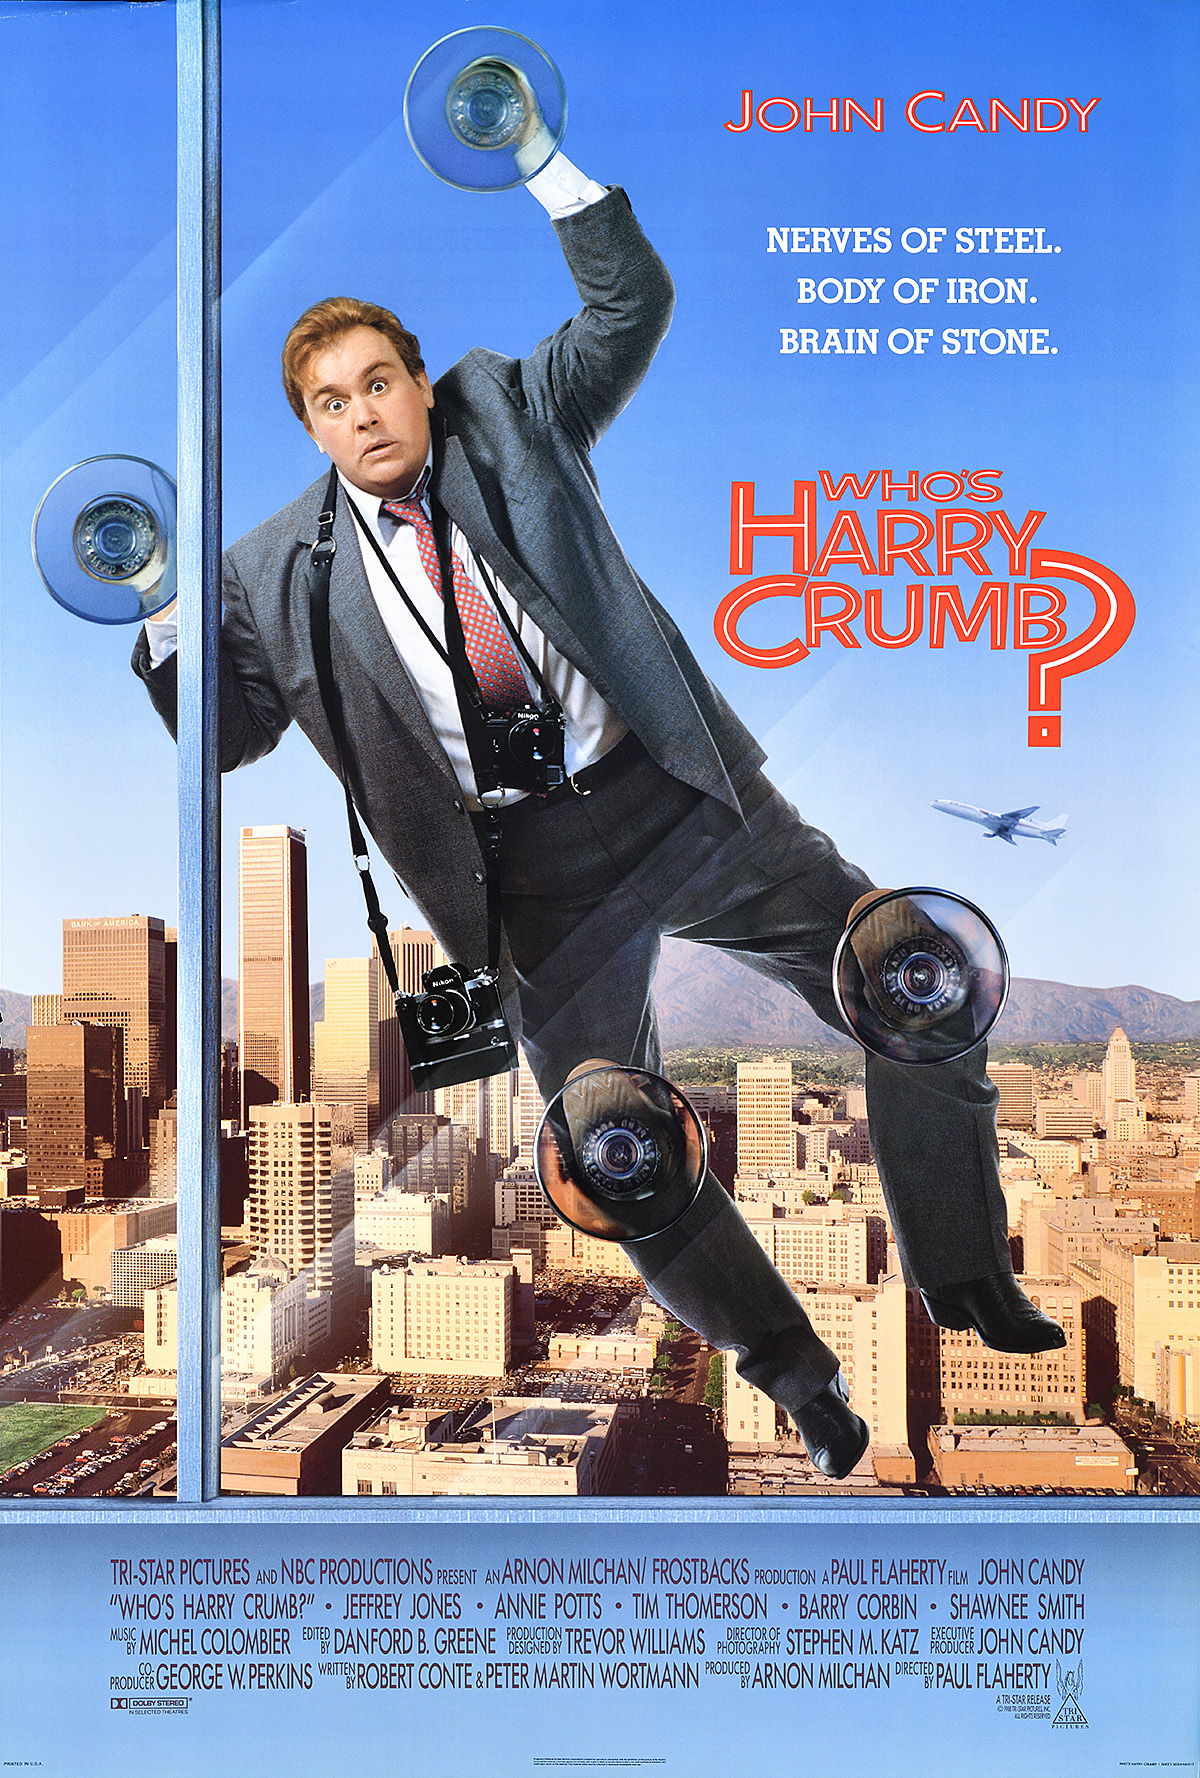 A poster of a suited man using suction cups to climb a window in front of a cityscape.